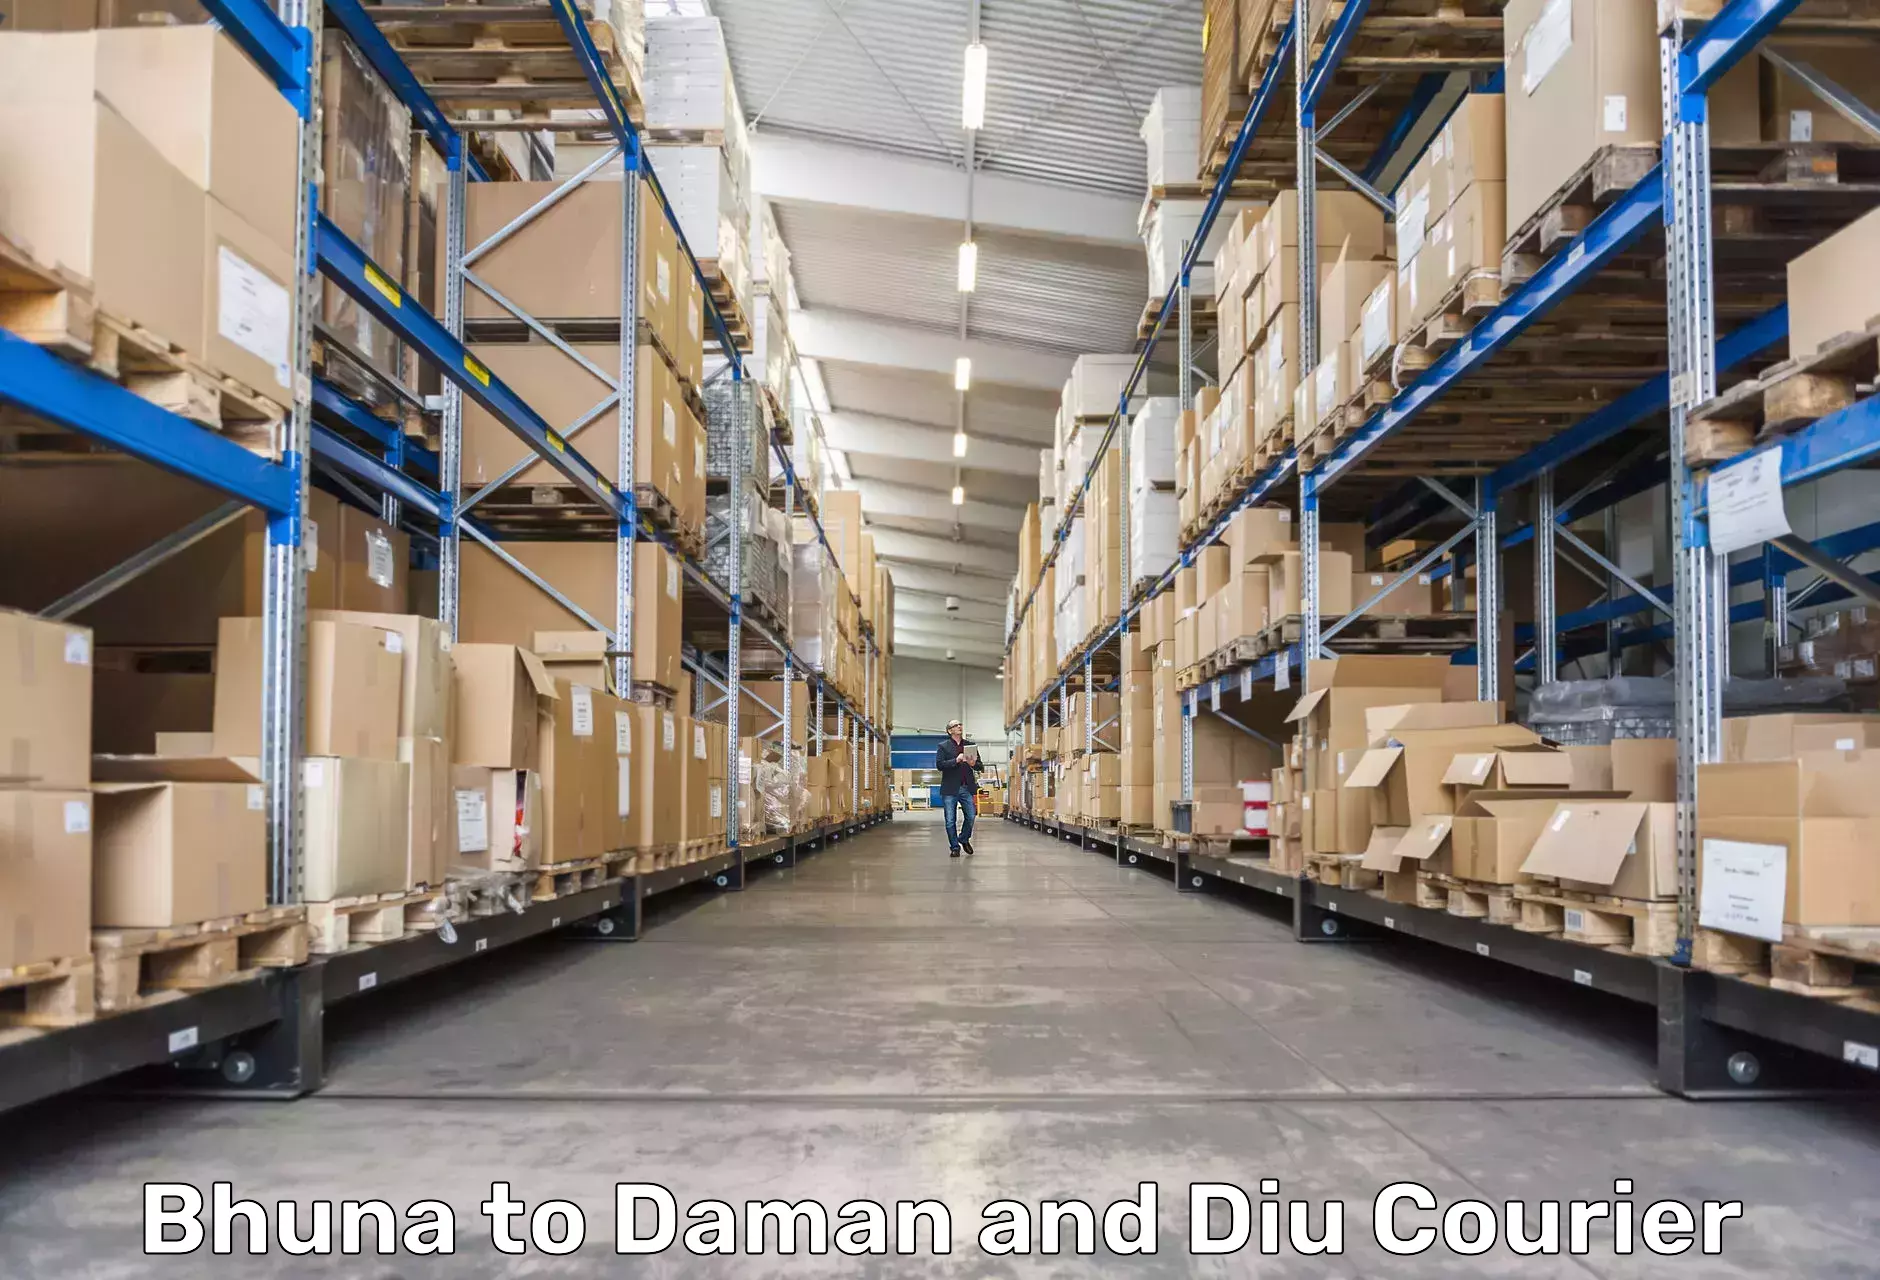 Tailored shipping plans Bhuna to Daman